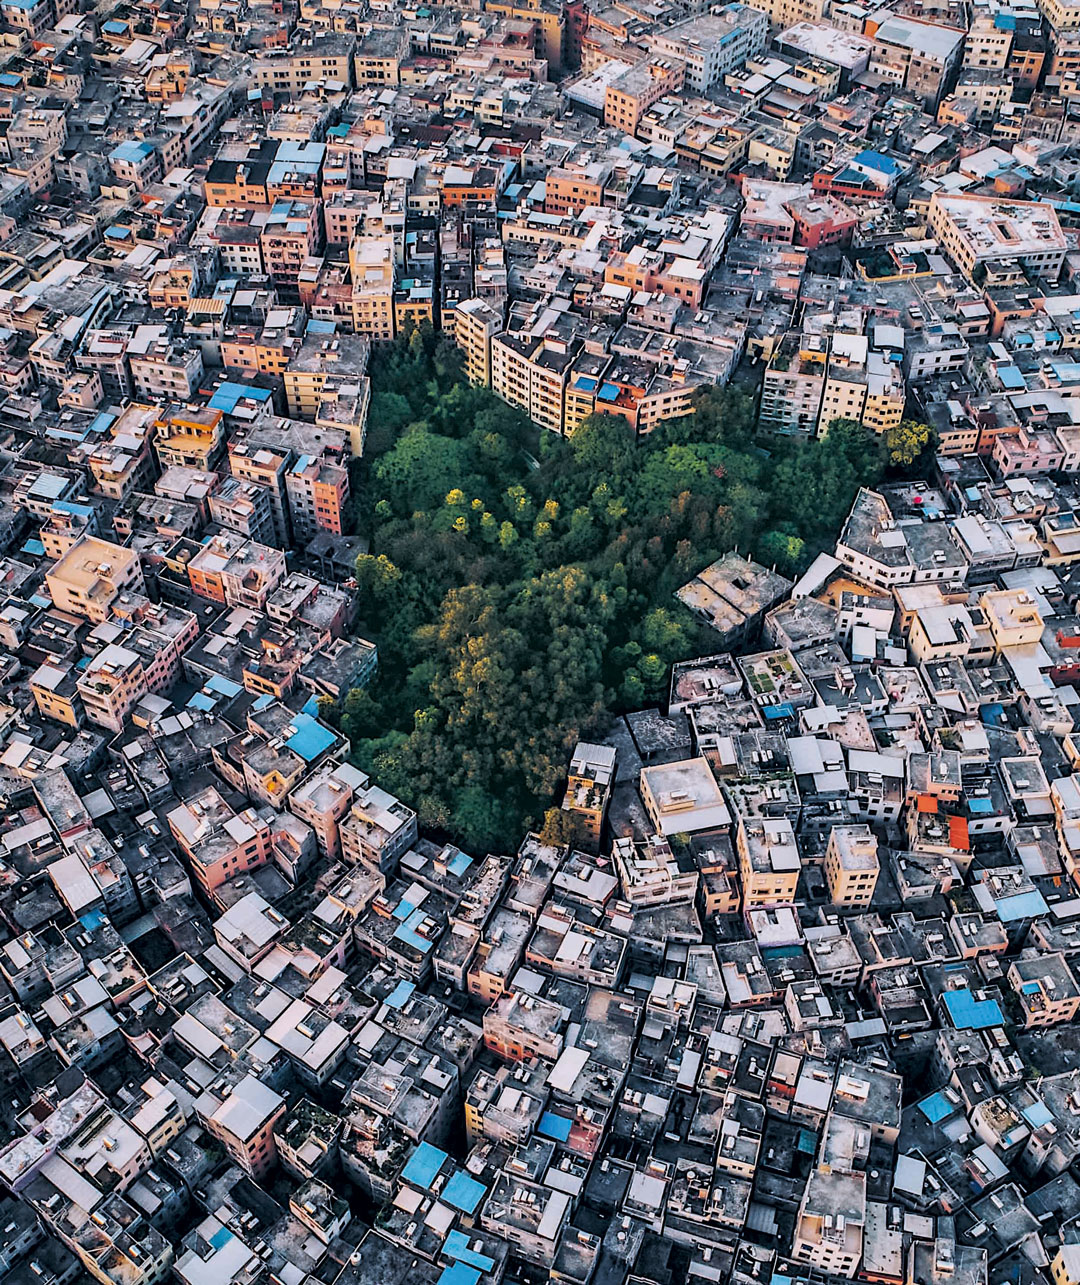 Guangzhou, Guangdong Province, China. An extreme example of a hyper-dense city where population size has increased fivefold since 1990. Many  Chinese cities are designed to maximize density in order to boost productivity and efficiency. Photo by Xin Zhang